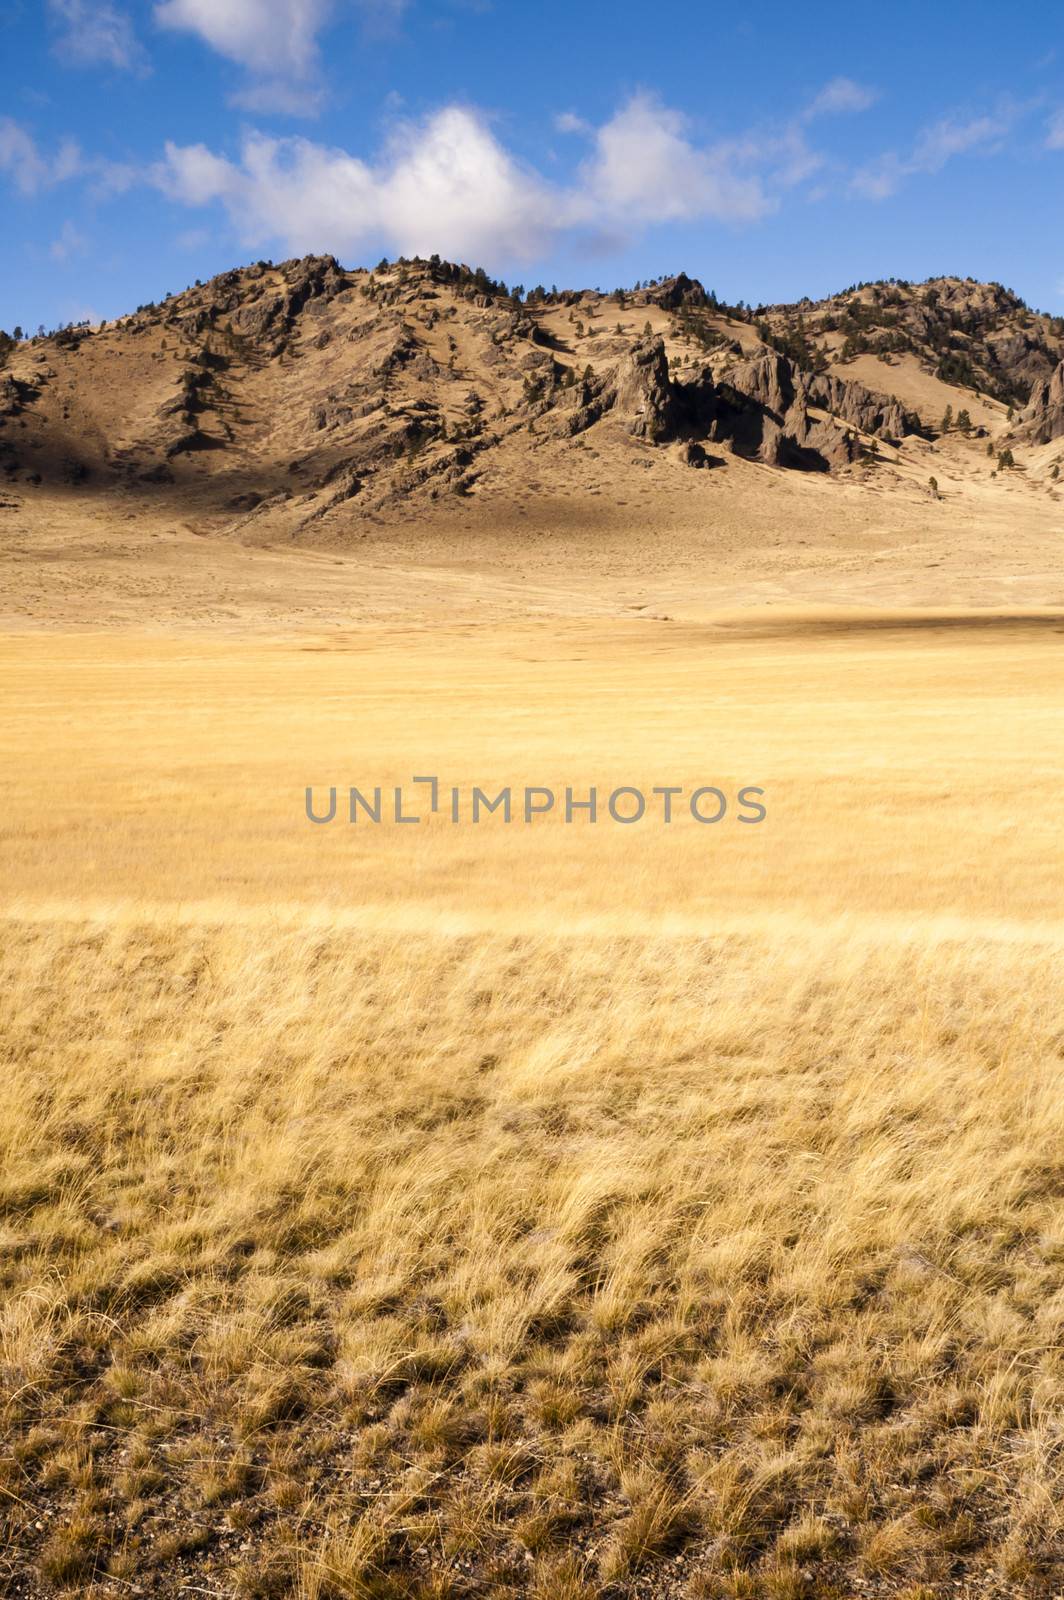 Grassland leads up to rocky hillside in this northern rural landscape